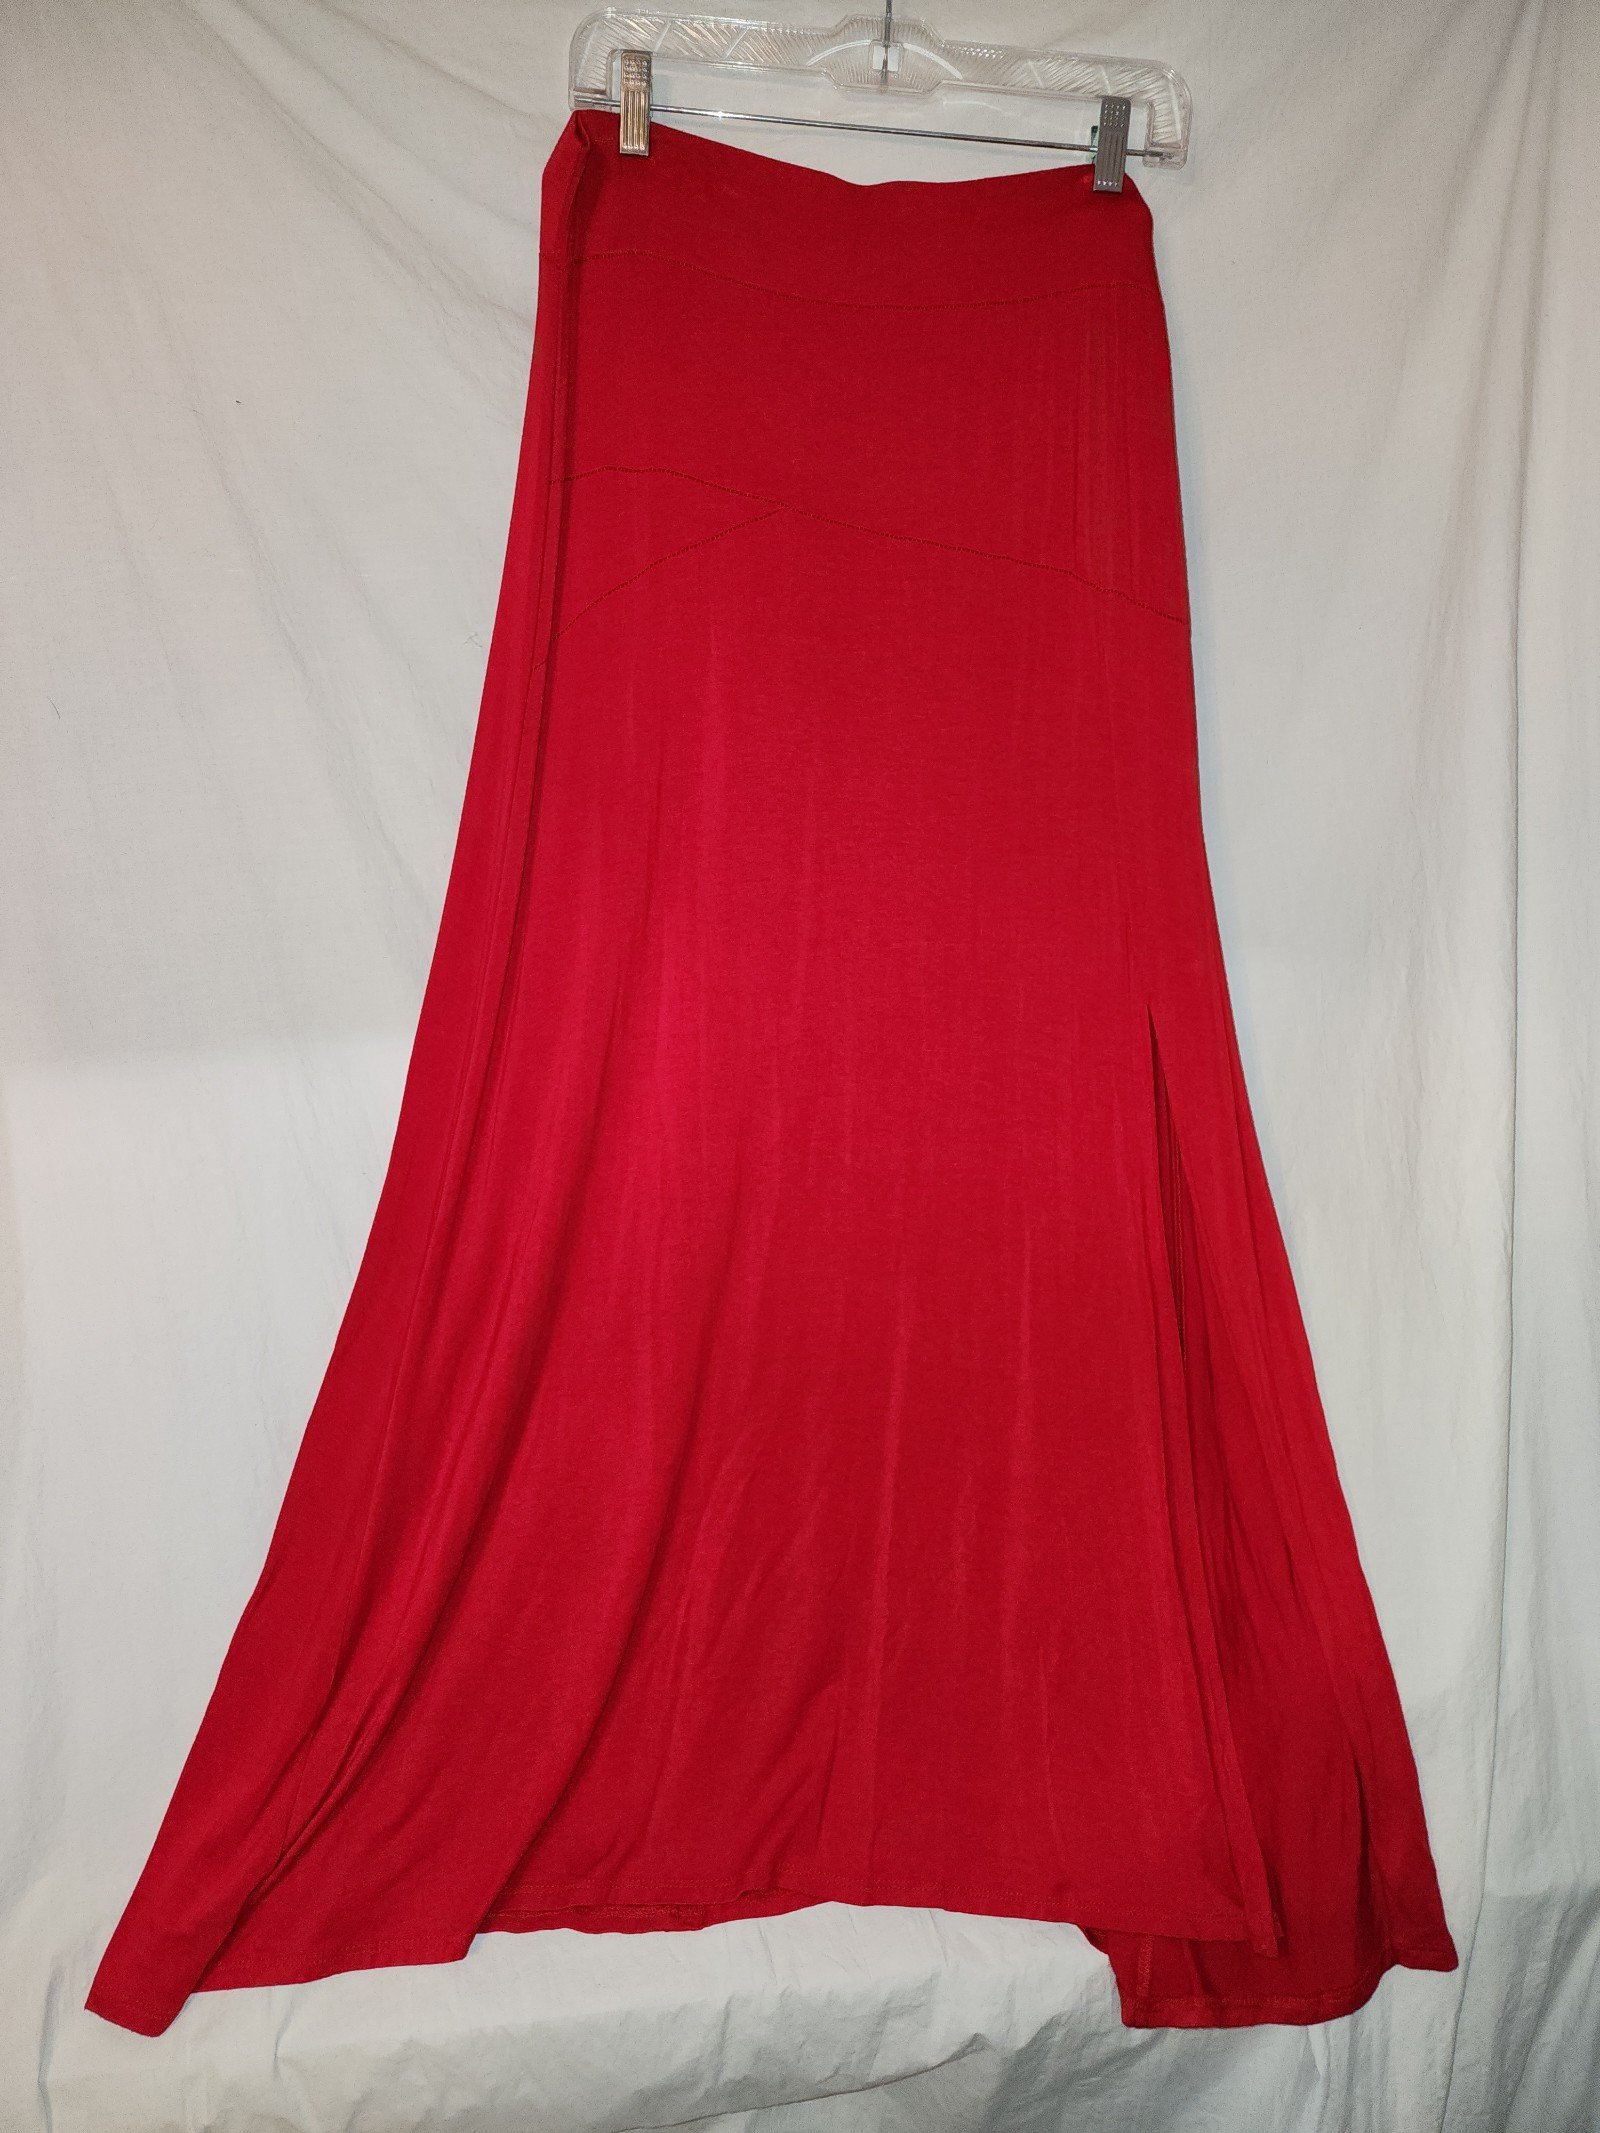 Wholesale price Roz & ali womens size large red long side slit maxi Skirt Pfg2RJWw4 all for you